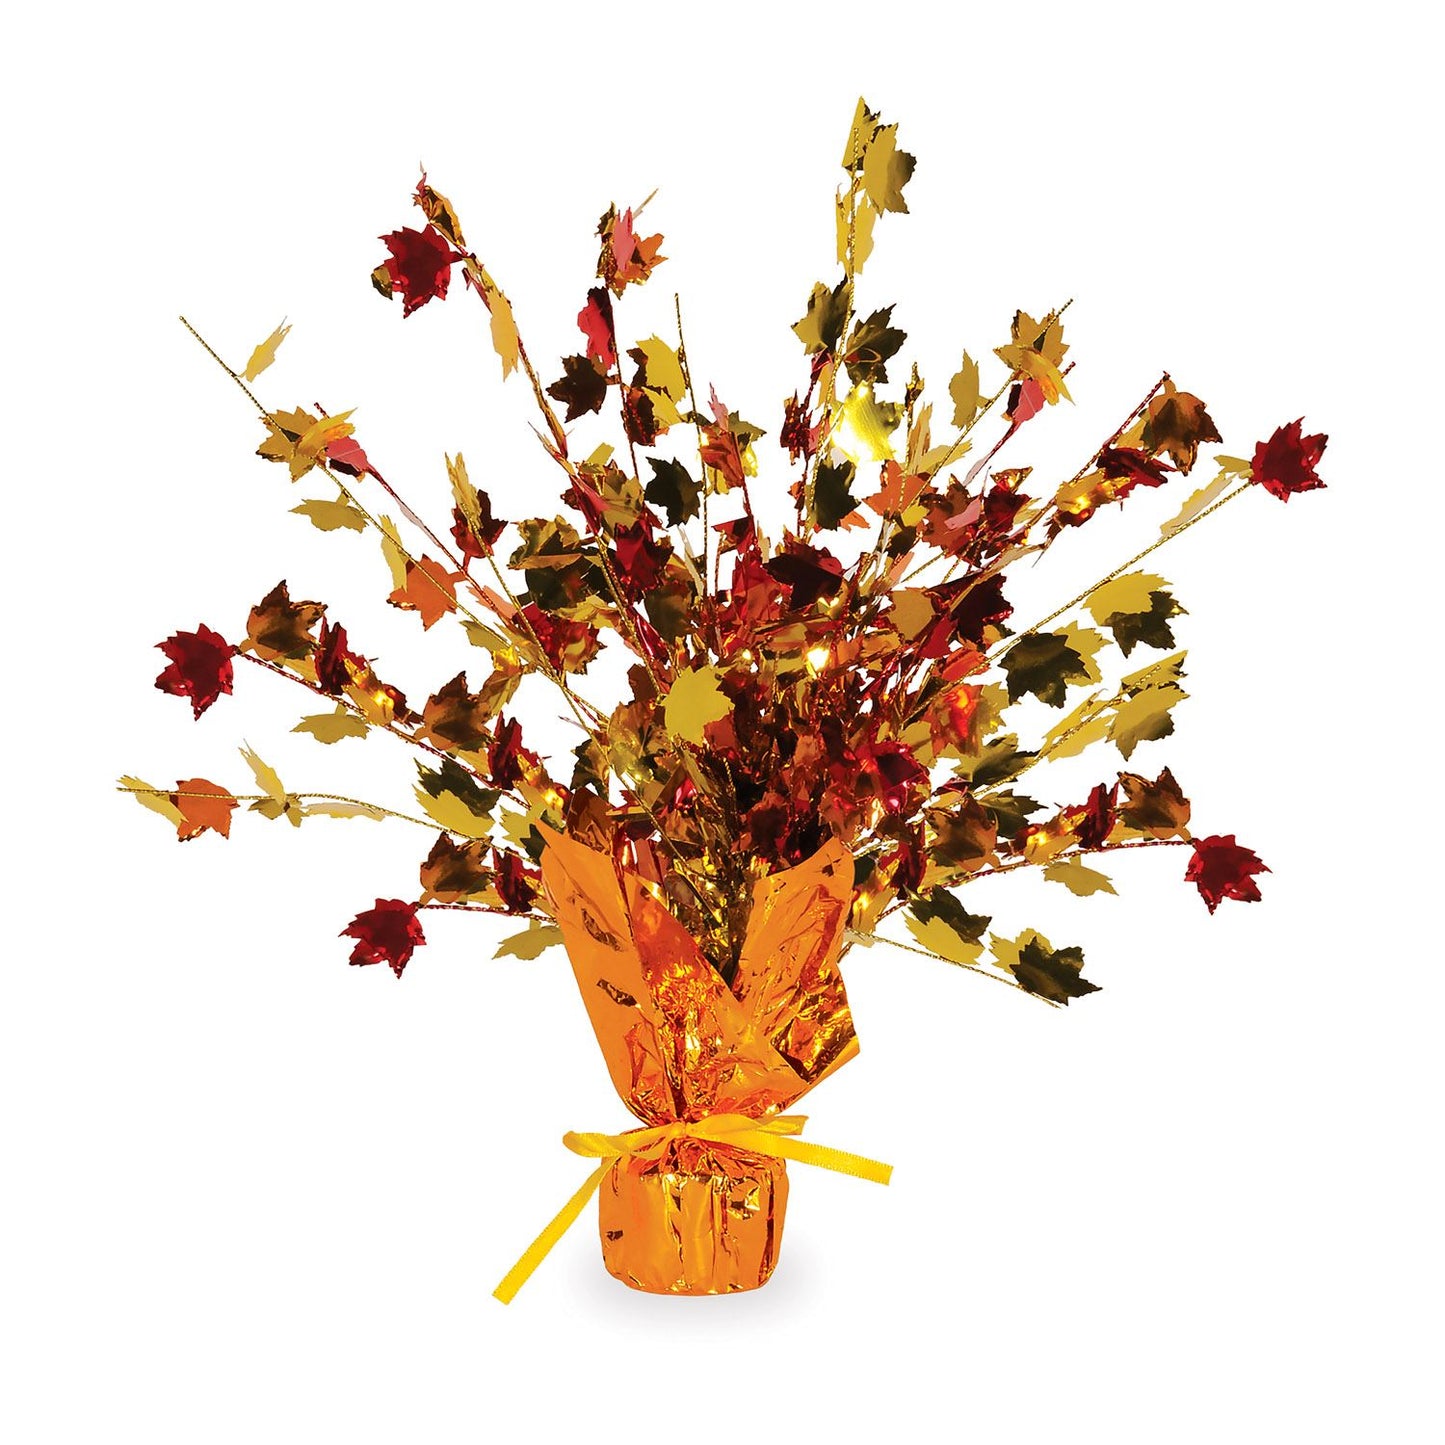 Beistle Fall Leaves Foil Centerpiece 15 in  (1/Pkg) Party Supply Decoration : Thanksgiving/Fall